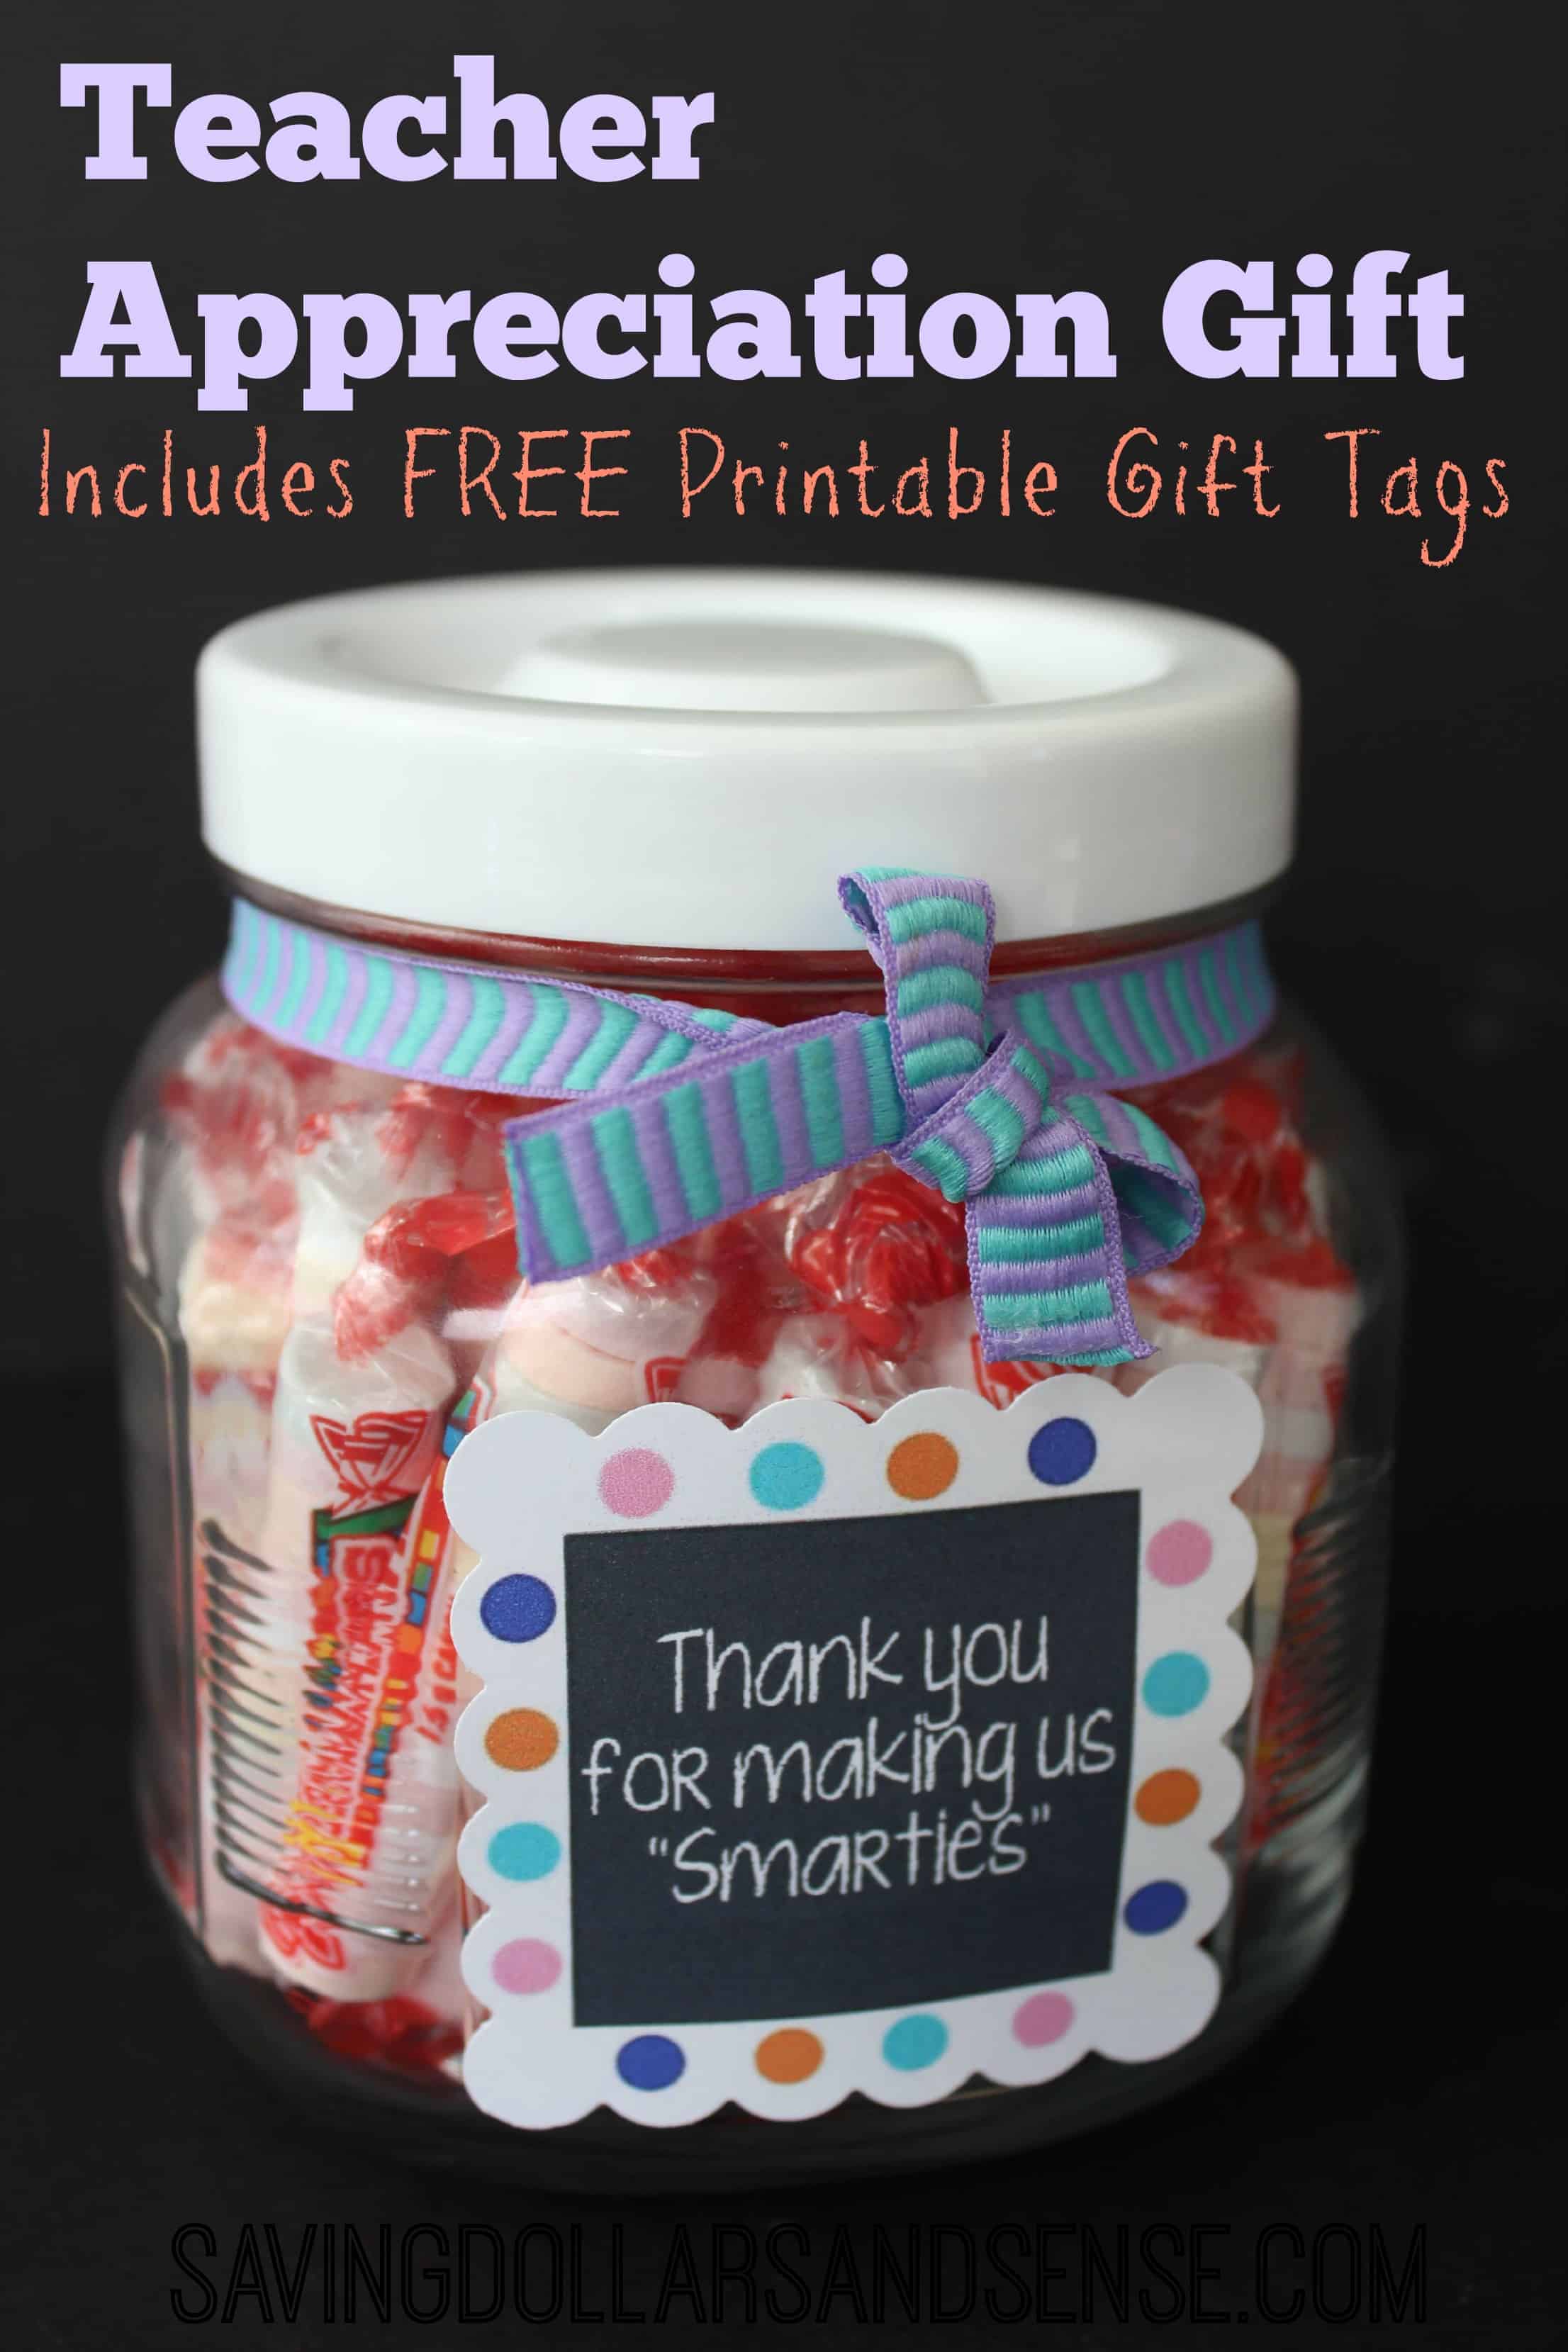 The Best Teacher Appreciation Gift Ideas for saying \"Thank You\".